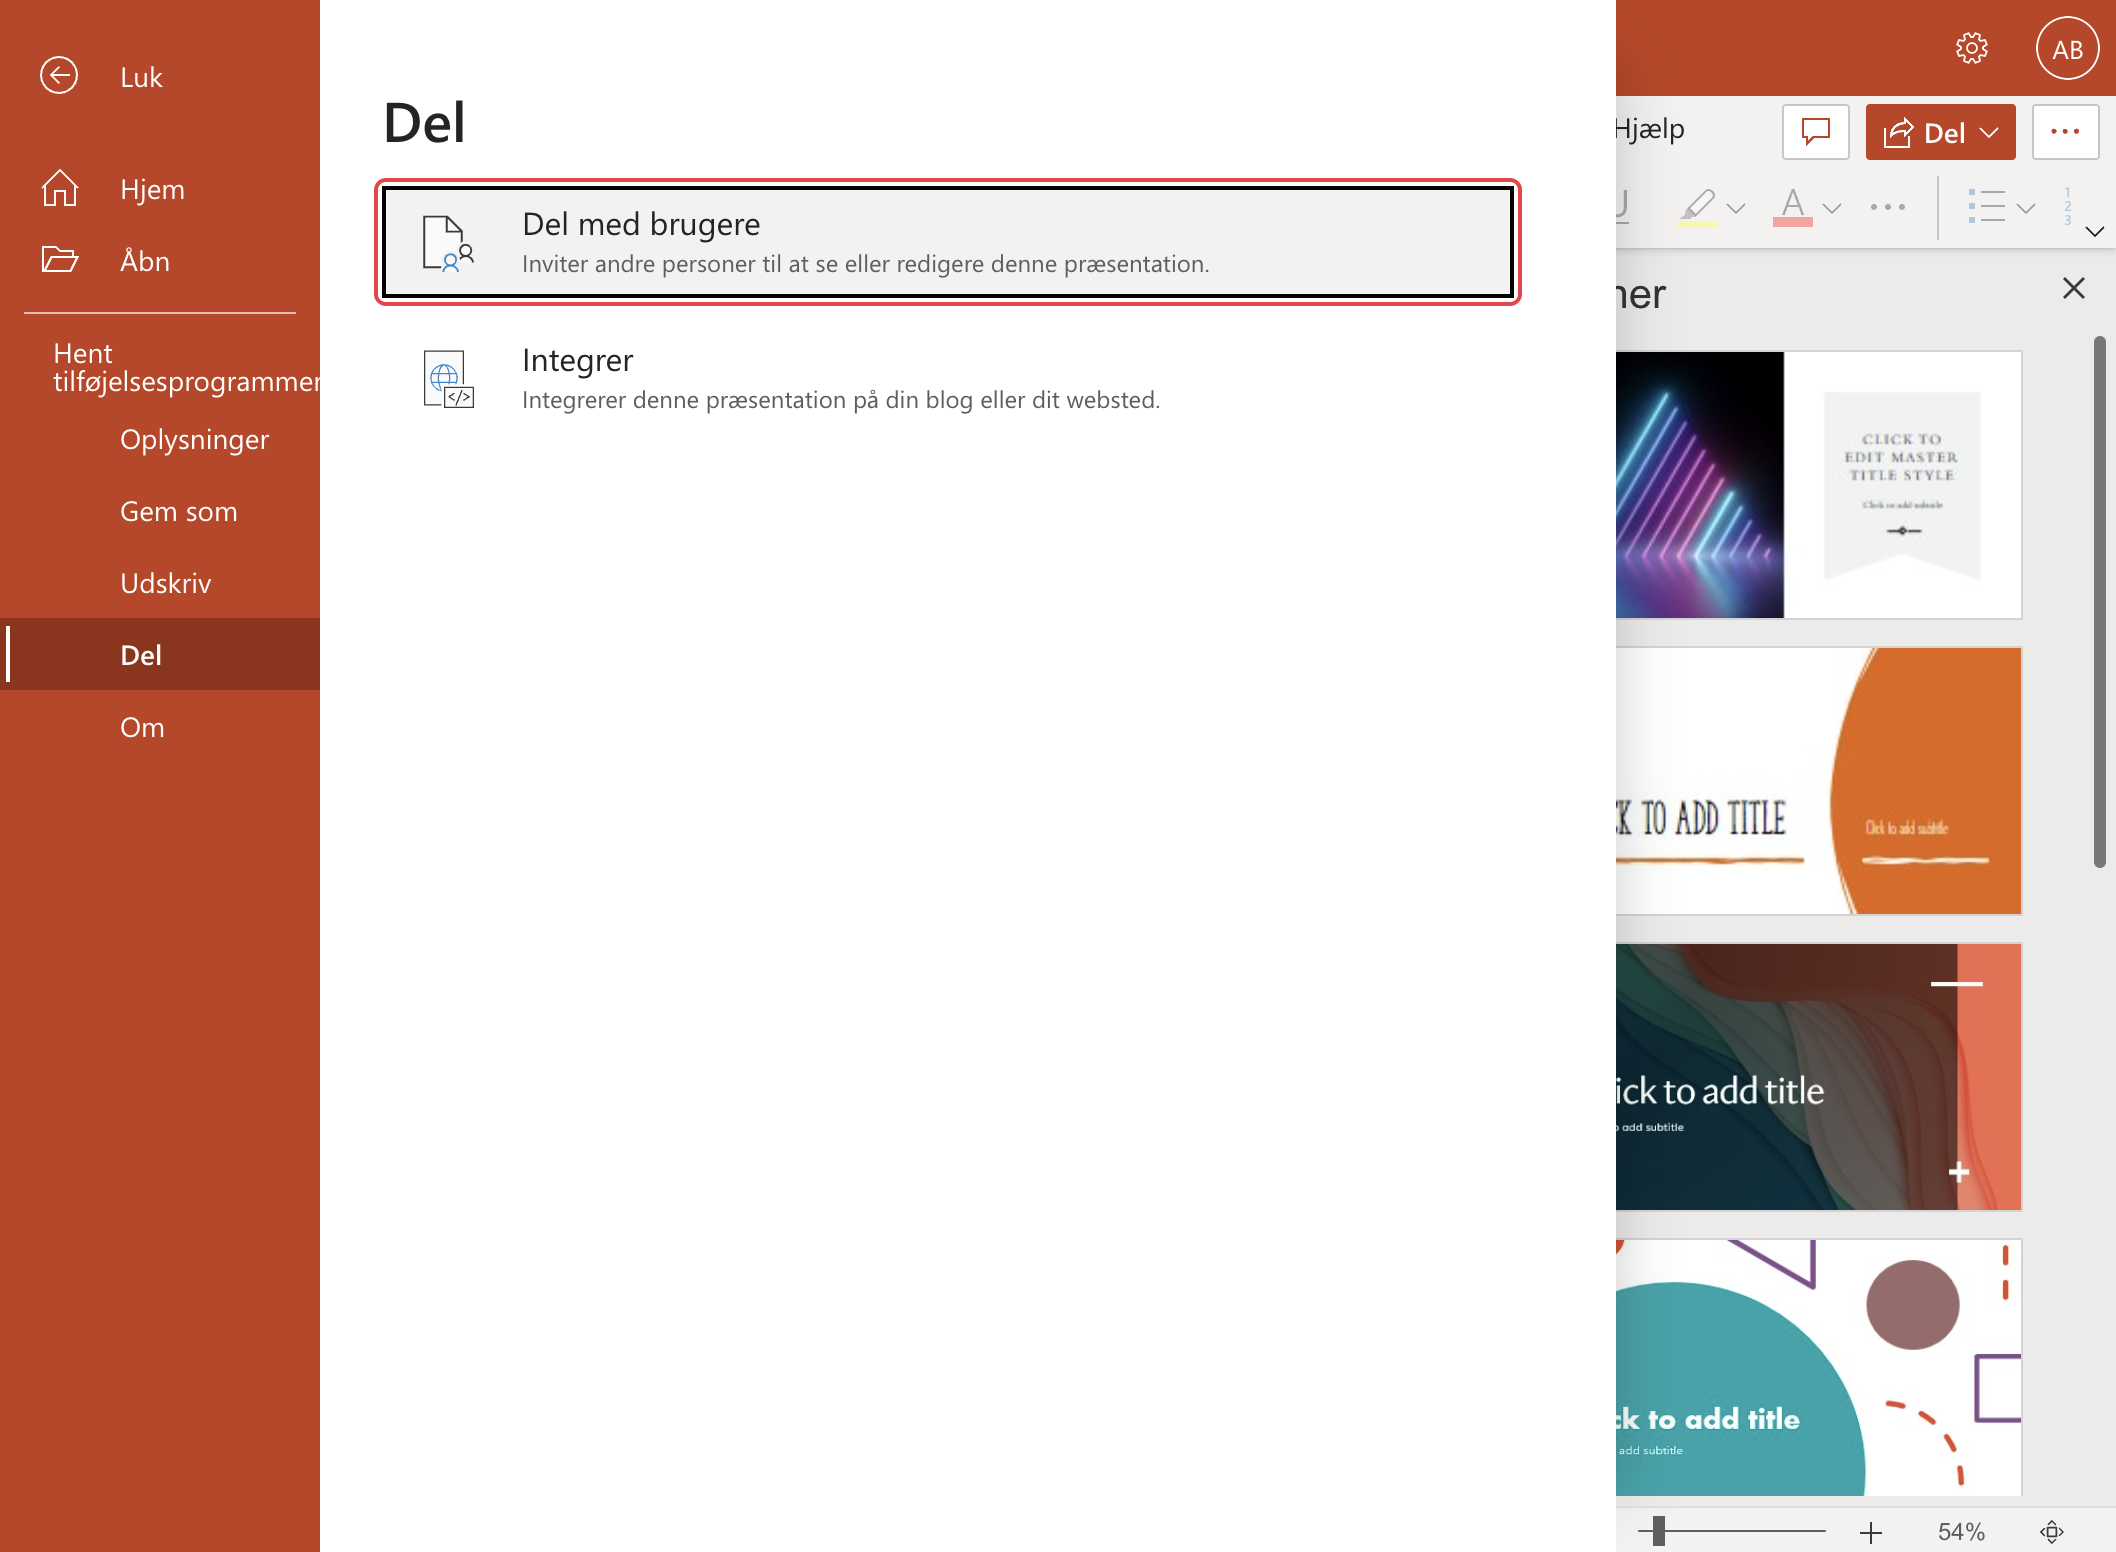 PowerPoint's 'Share' menu open with options to share with users, with a highlighted feature for inviting others to view or edit the presentation.